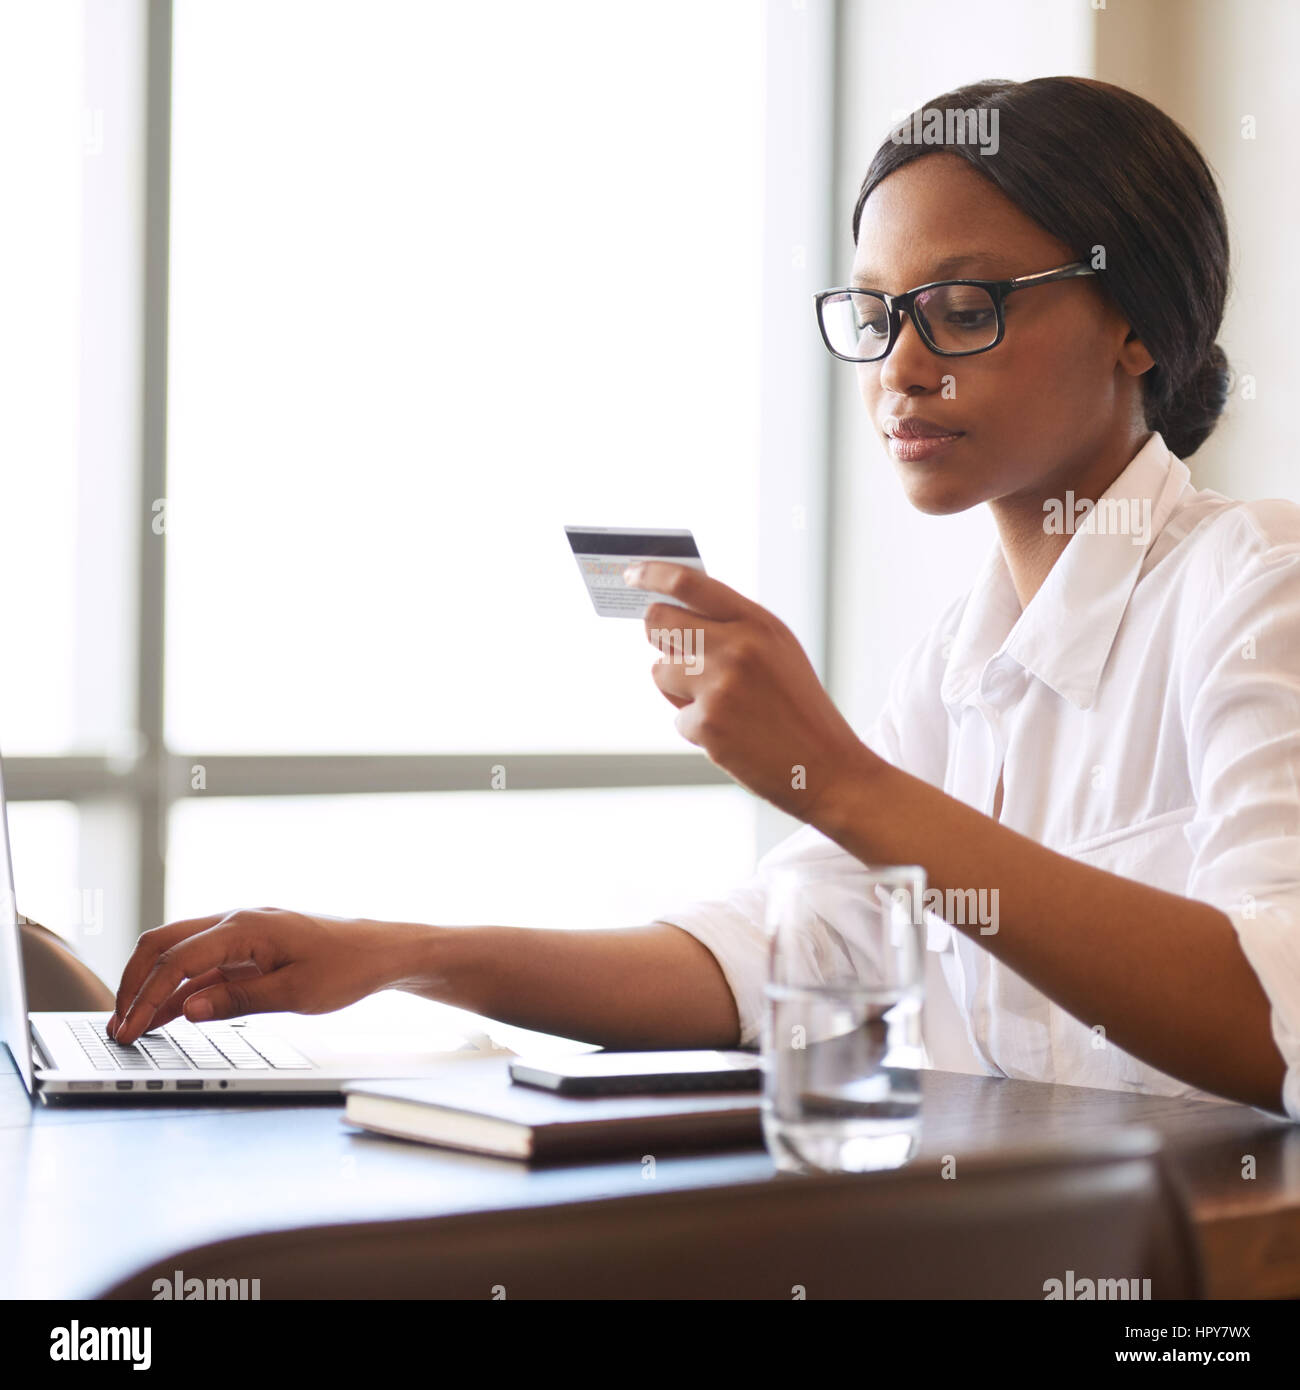 Square image of beautiful young black female busy holding a credit card in one hand reading off the required information and typing in the relevant di Stock Photo